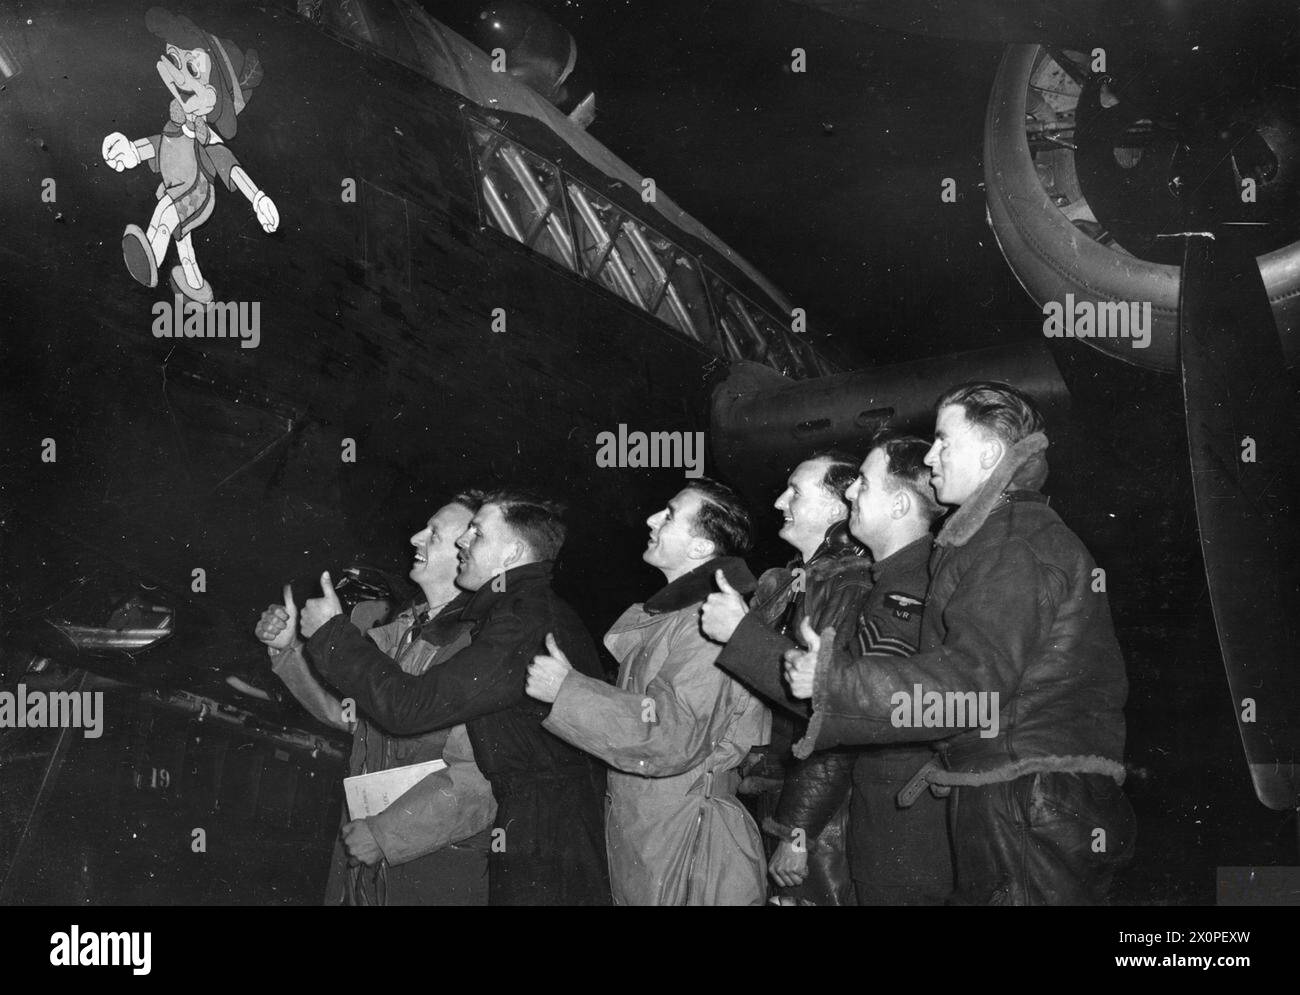 RAF BOMBER COMMAND 1940 - A Wellington crew admire the Pinocchio artwork on the side of their aircraft, 5 September 1940 Stock Photo